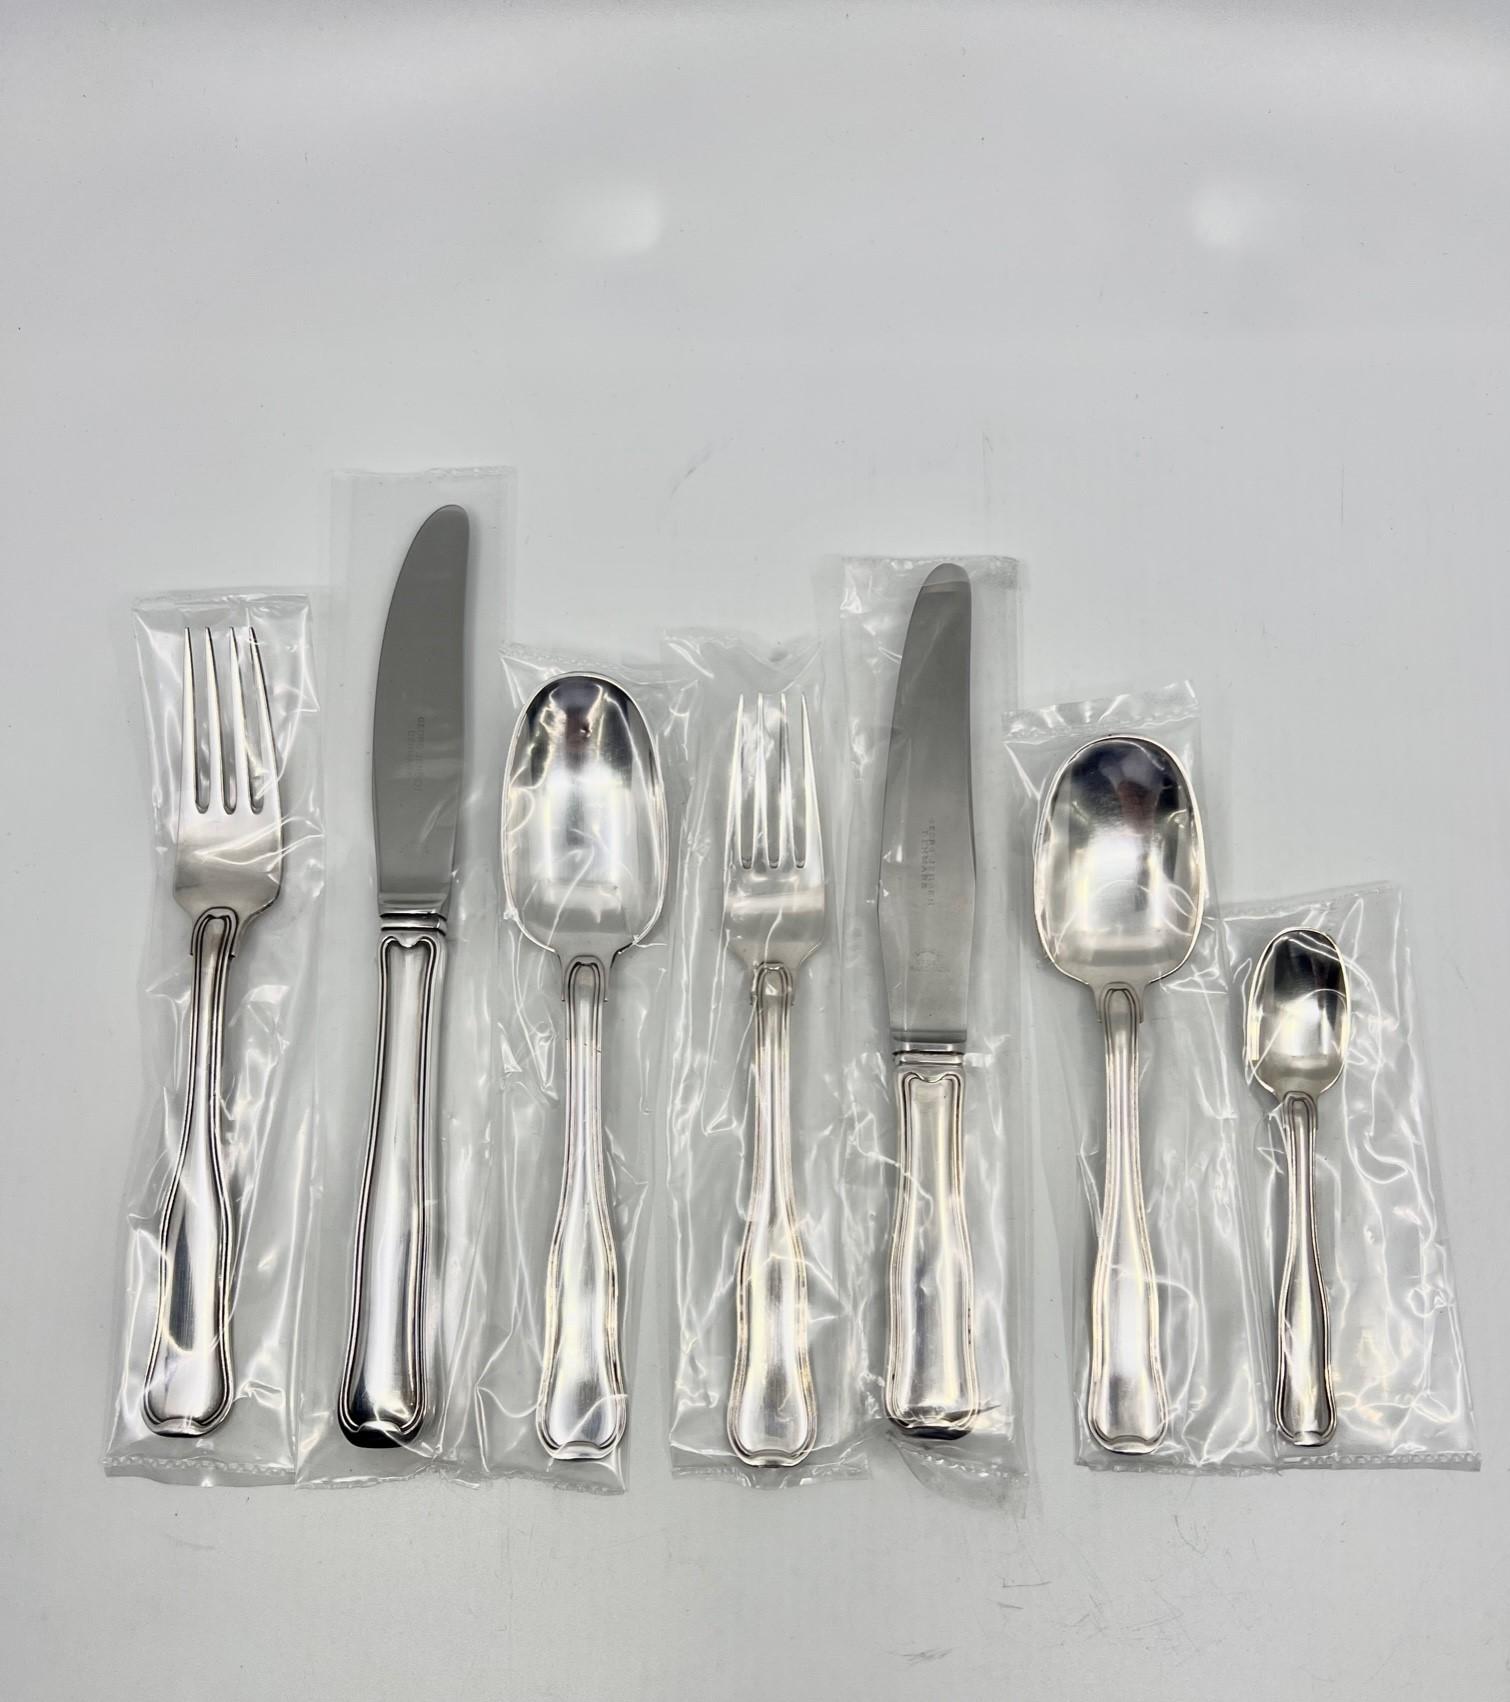 A complete vintage Georg Jensen Old Danish sterling silverware service for 12 persons. The Old Danish design was designed by Harald Nielsen in 1947, called “Dobbeltriflet” in Danish, Dobbeltriflet is often said to be Denmark’s national silverware